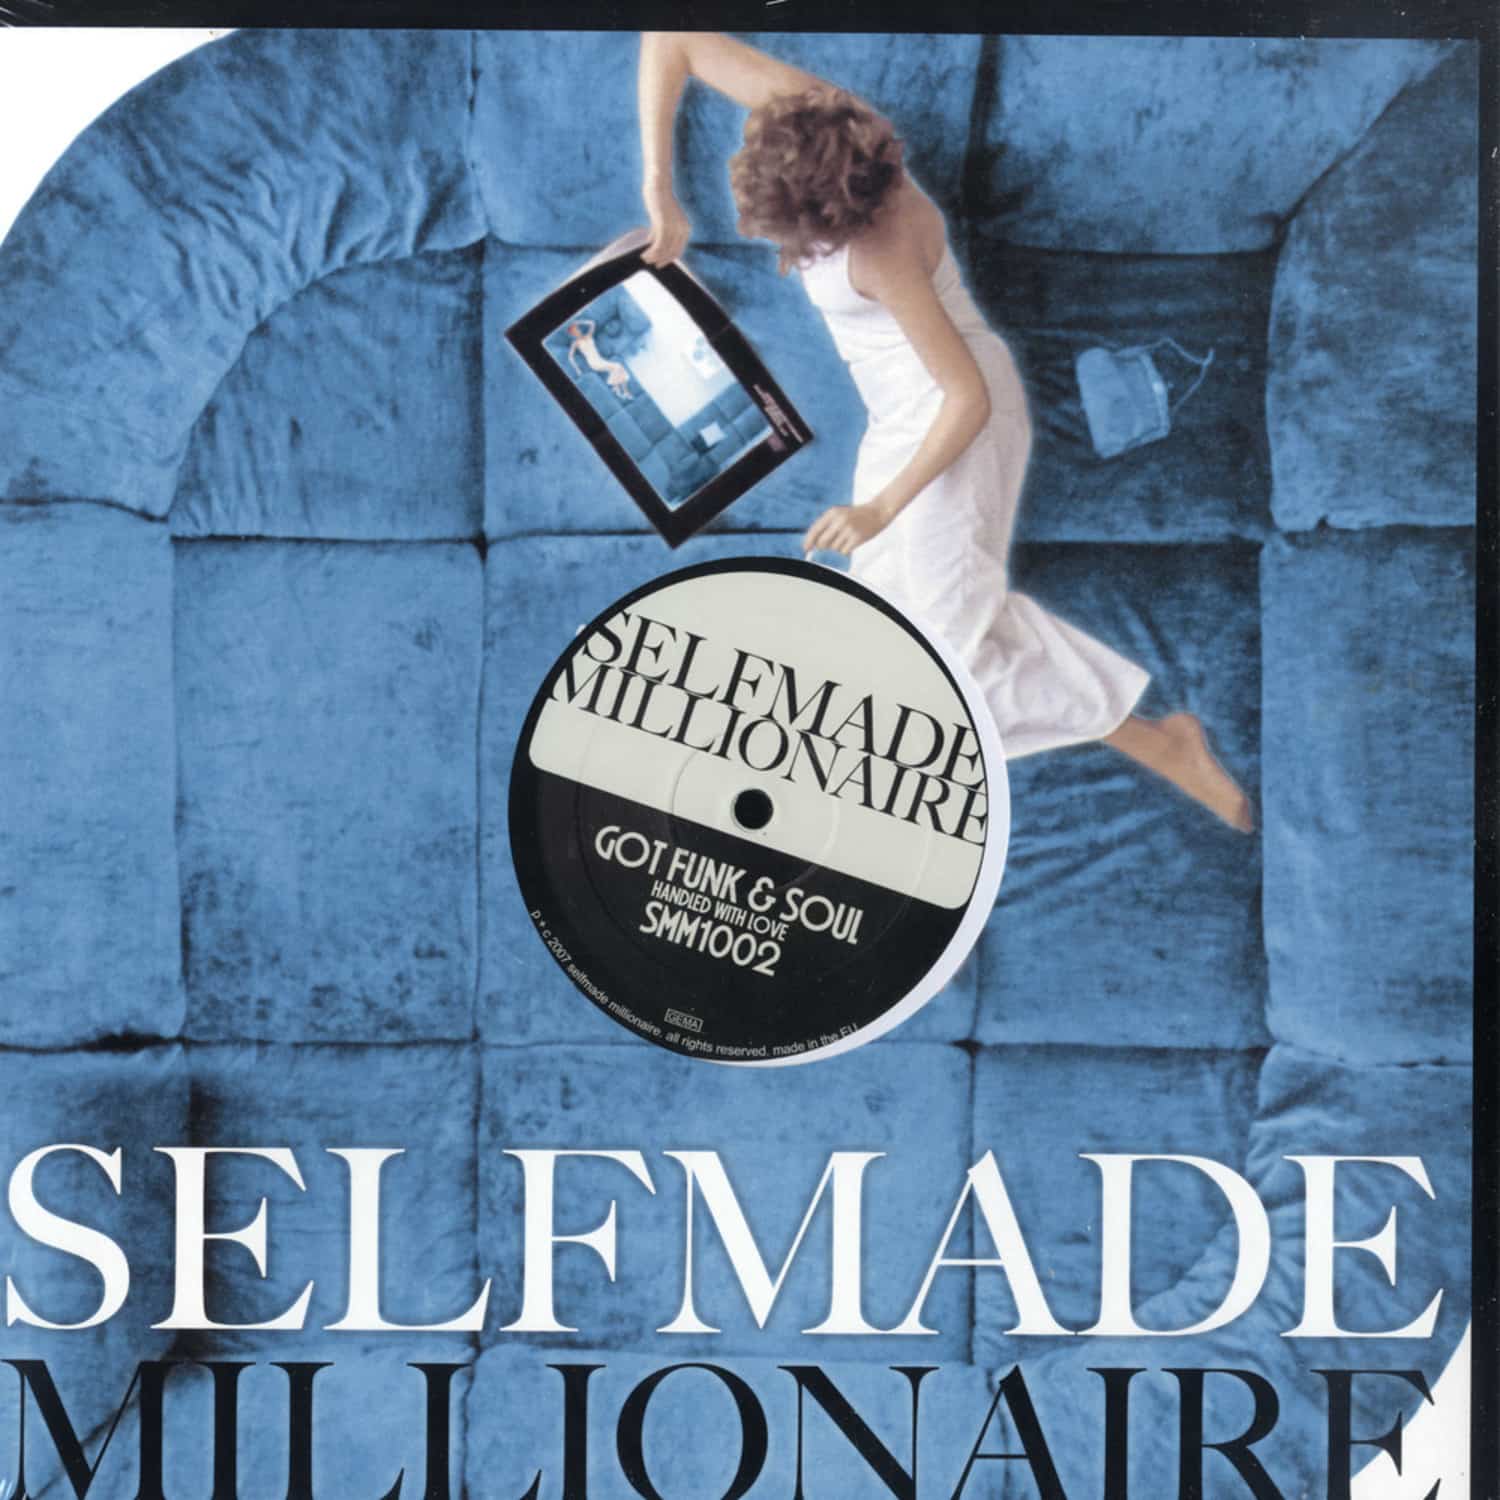 Selfmade Millionaire - GET DOWN BOOGIEWOMAN / GOT FUNK & SOUL